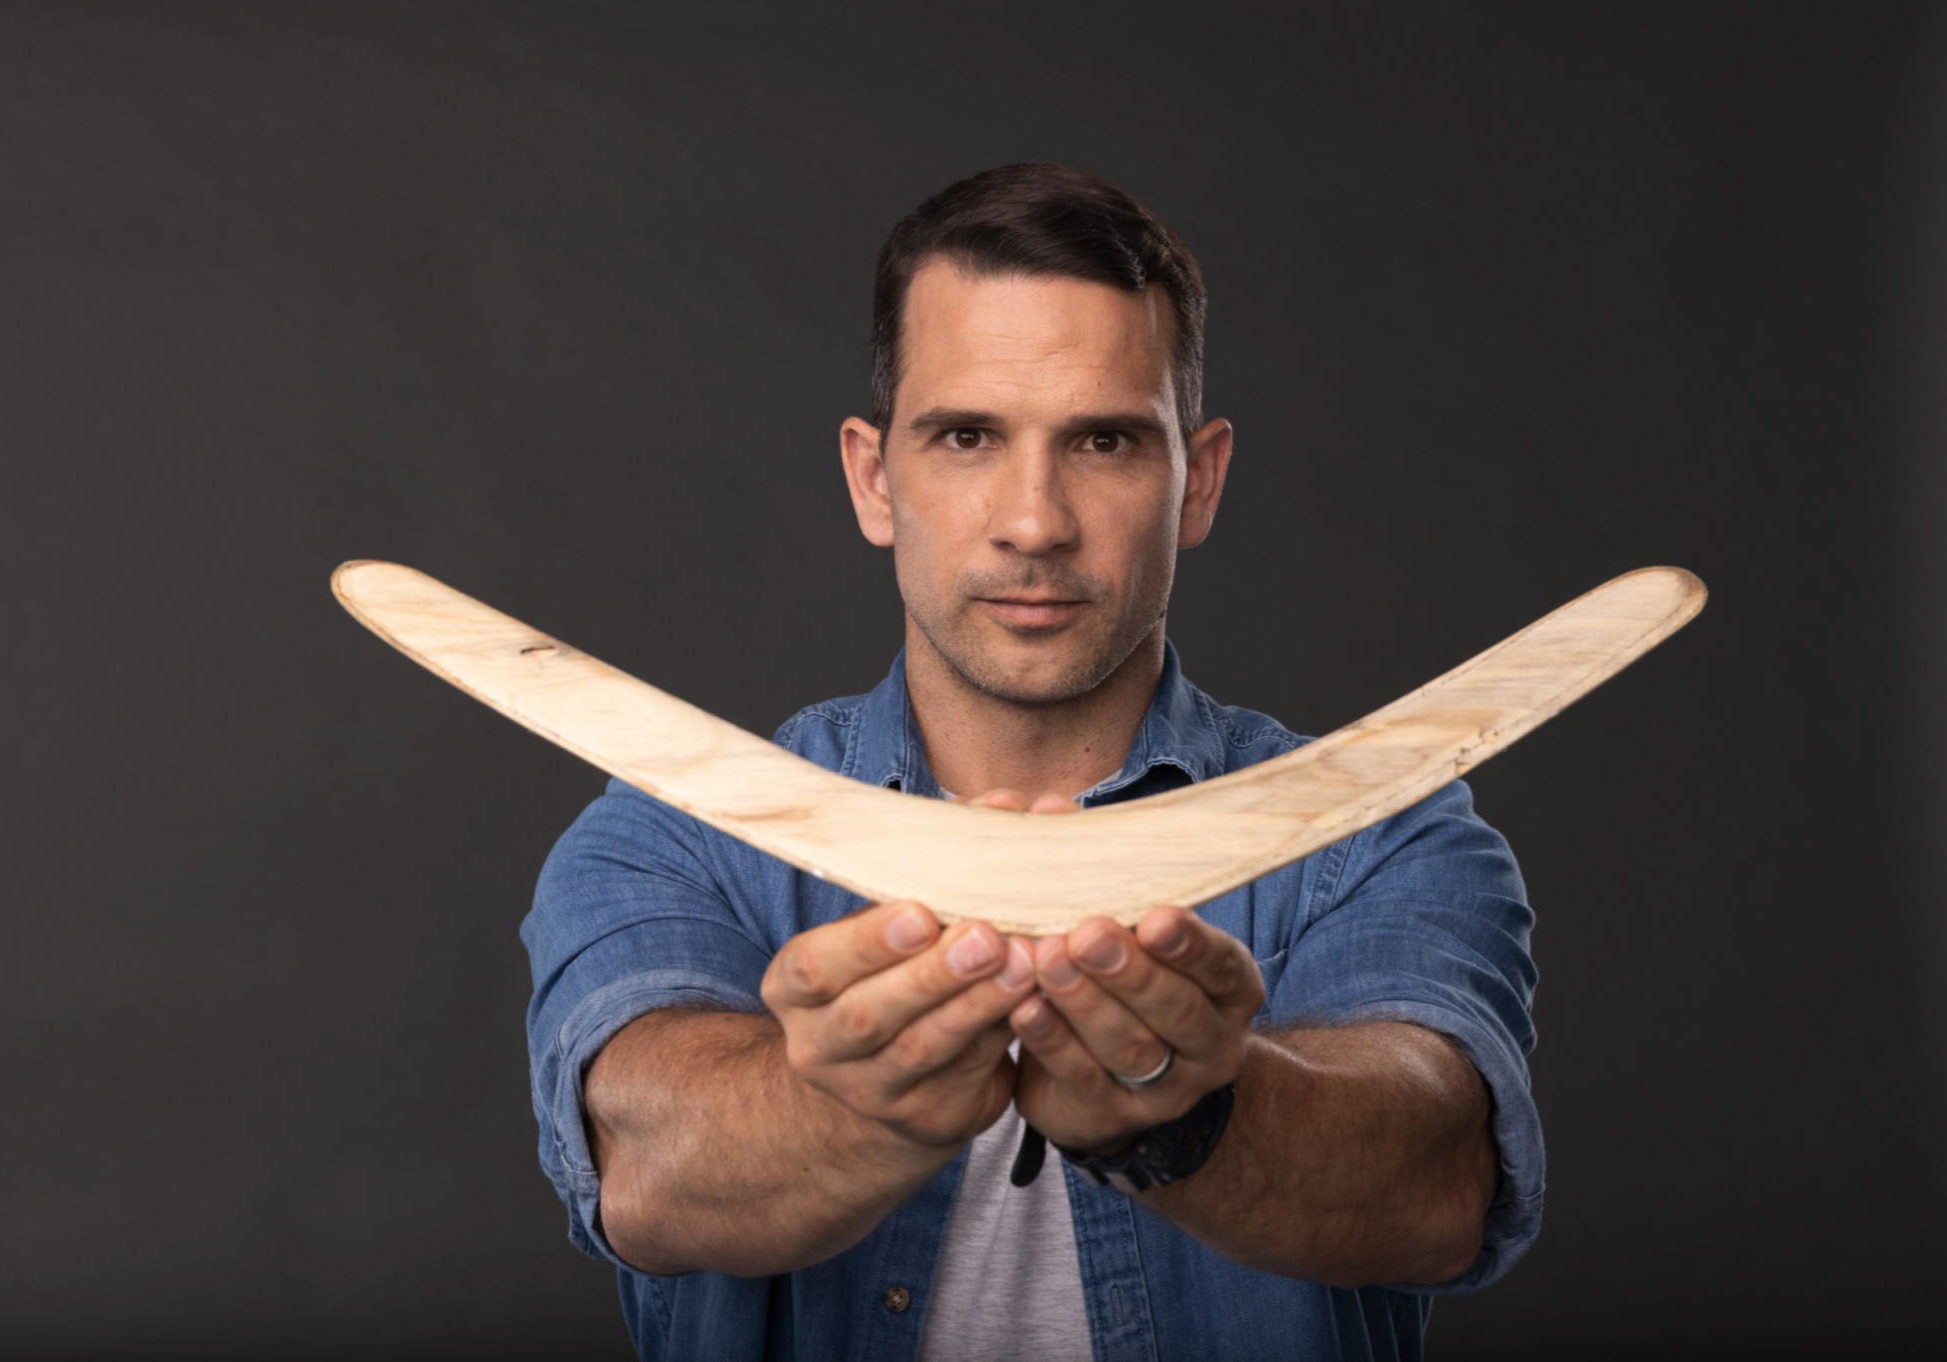 Phillip Breslin looks at the camera and holds a boomerang as part of FIRST WEAPONS